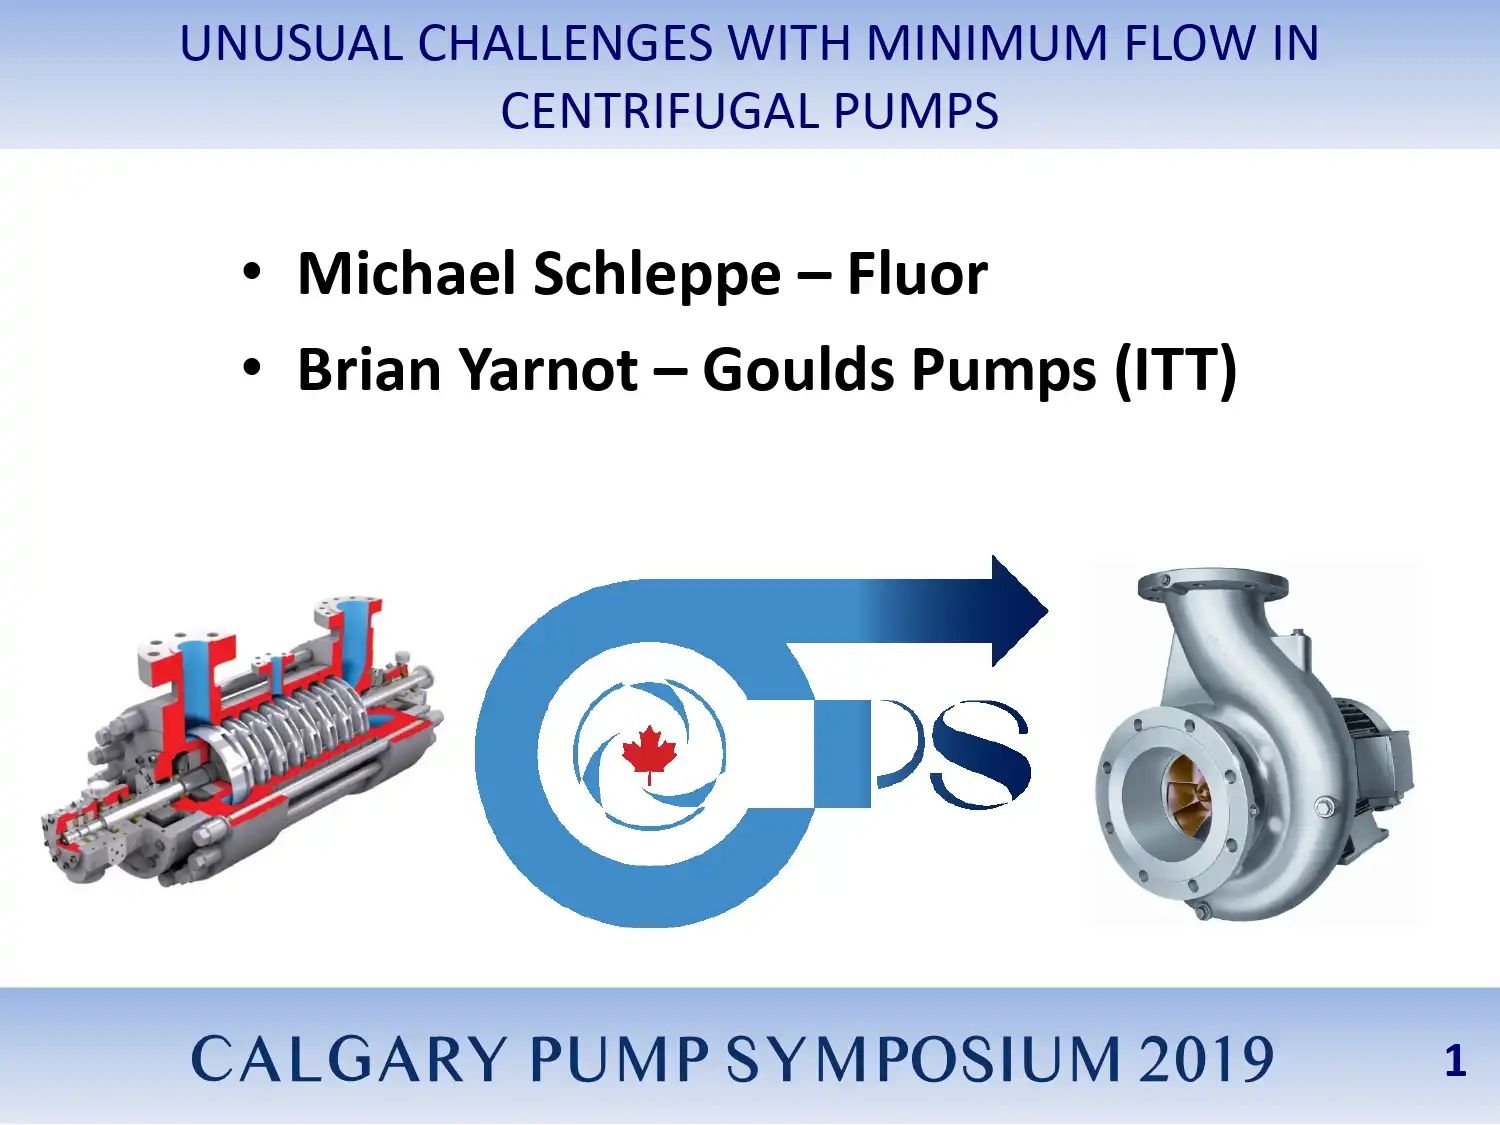 Unusual Challenges with Minimum Flow in Centrifugal Pumps